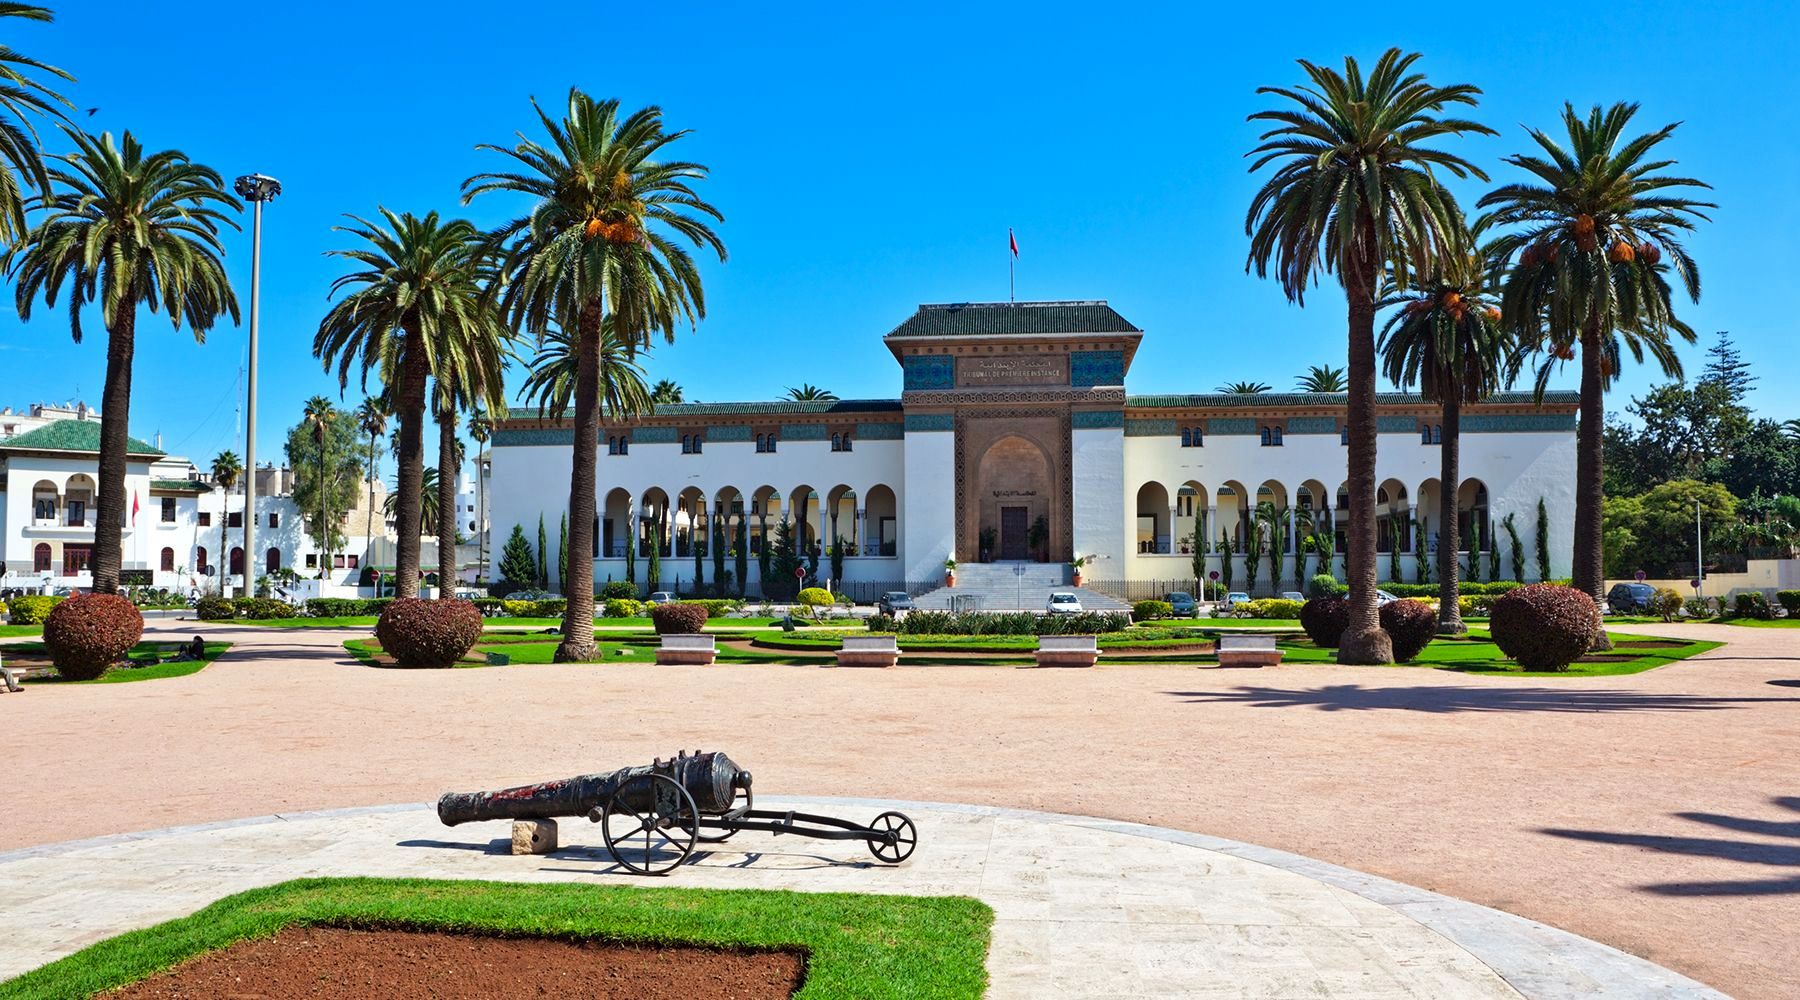 Casablanca city guided tours to discover the highlights of the economic capital of Morocco